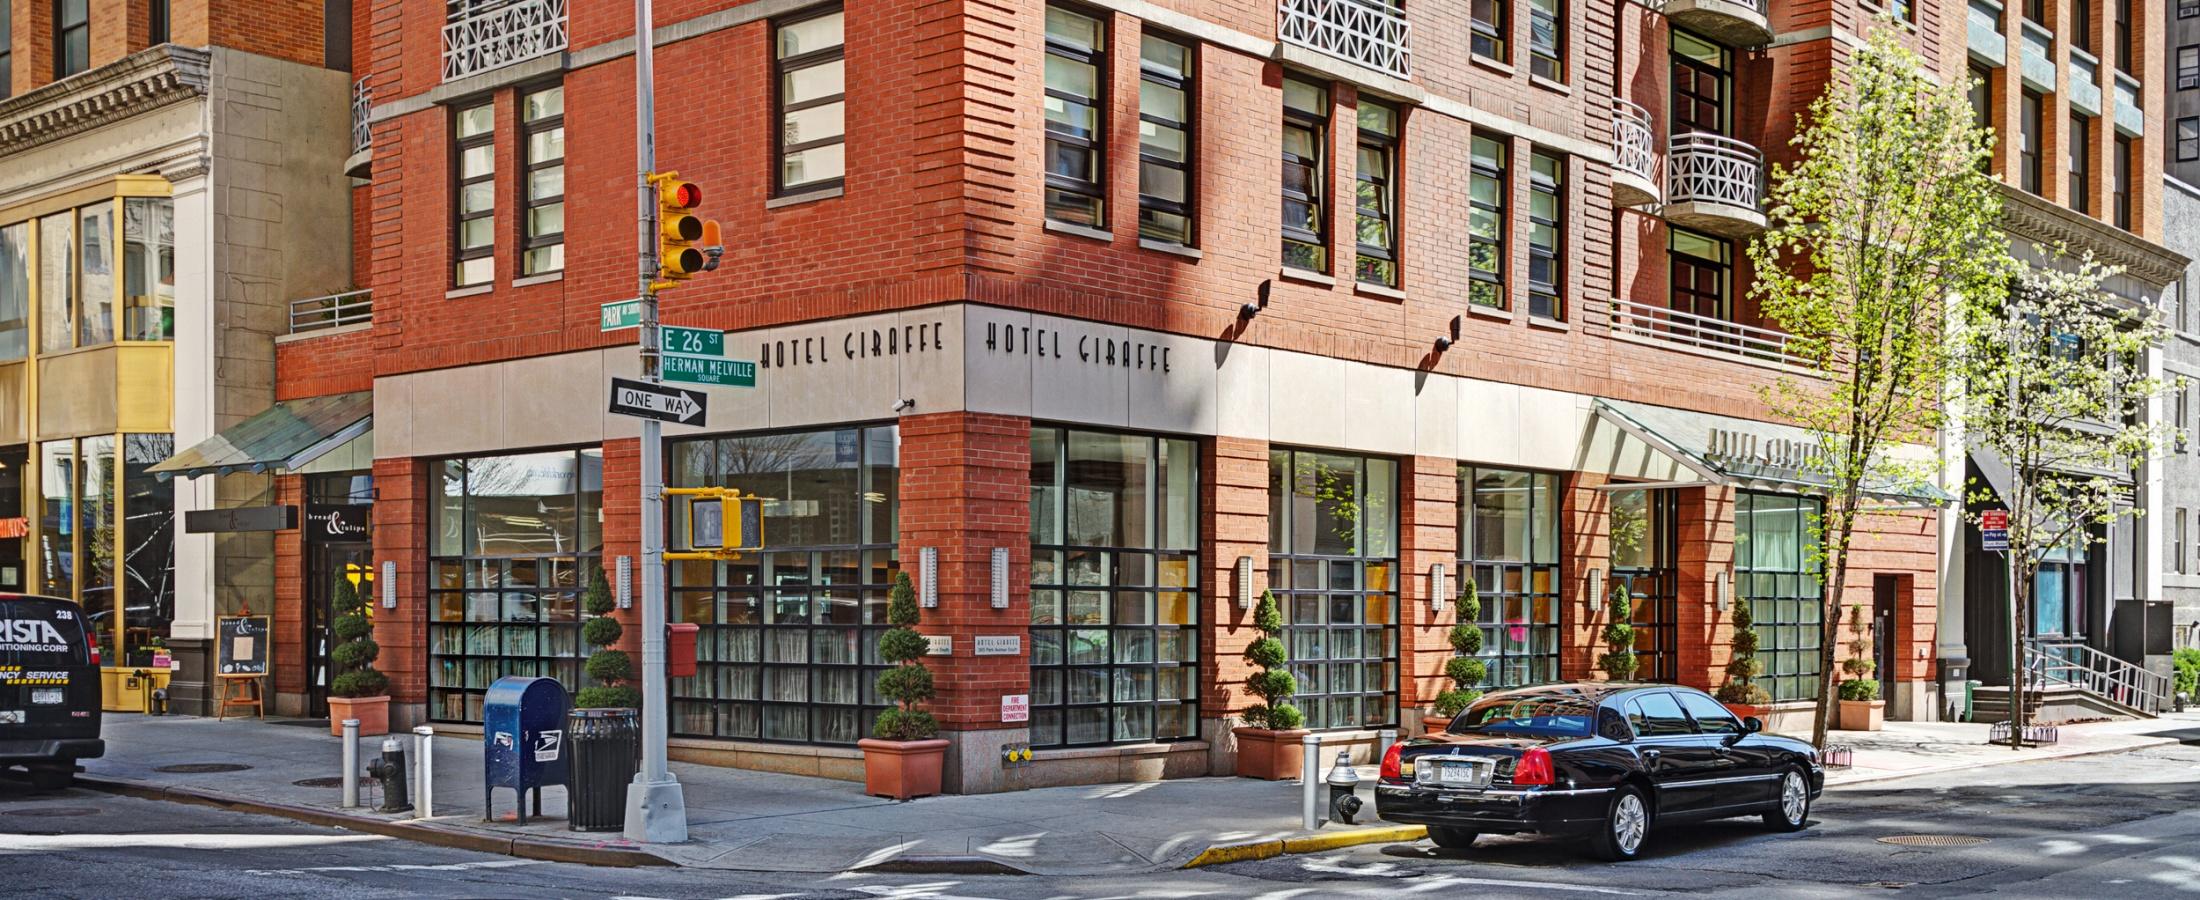 Hotel Giraffe is located on the corner of East 26th St and Park Ave South, just east of Madison Square Park.